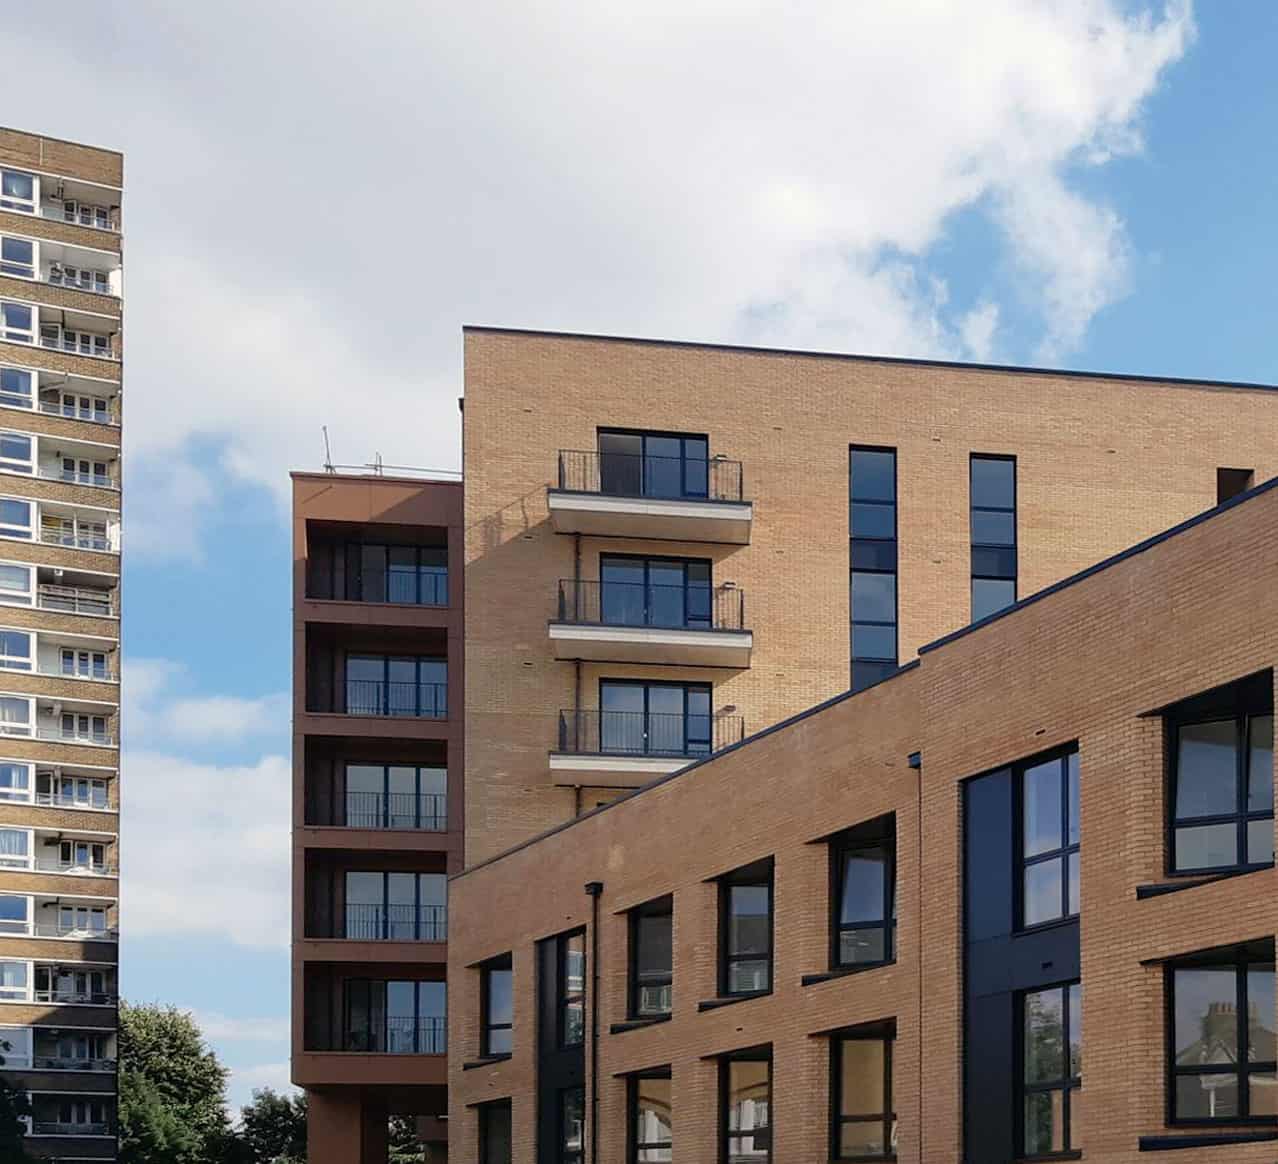 Shuttleworth Road: a new build development providing 71 affordable homes in a scheme ranging from three- to seven-storeys in height set across four cores.